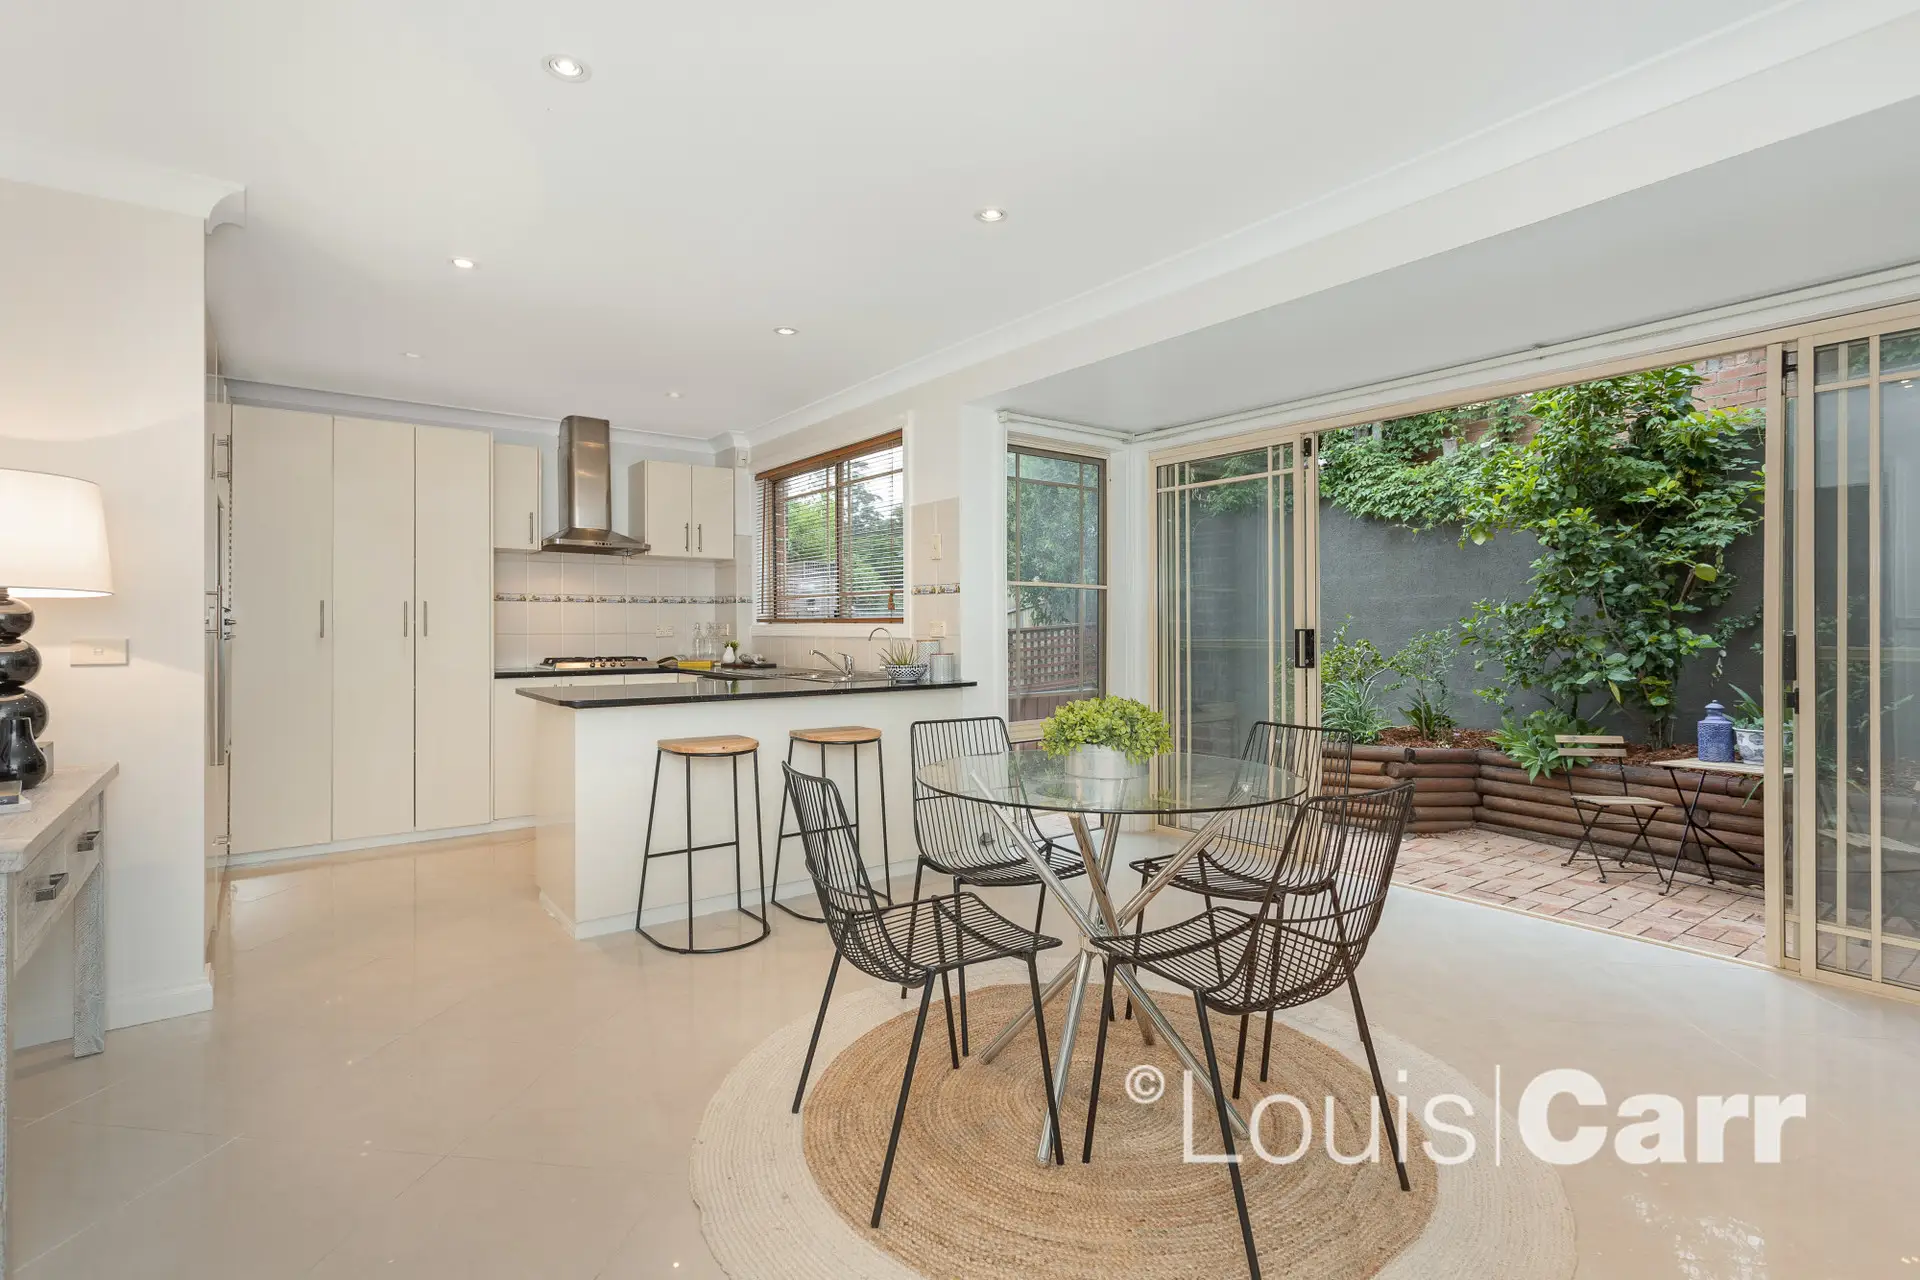 Photo #2: 5/23 Glenvale Close, West Pennant Hills - Sold by Louis Carr Real Estate